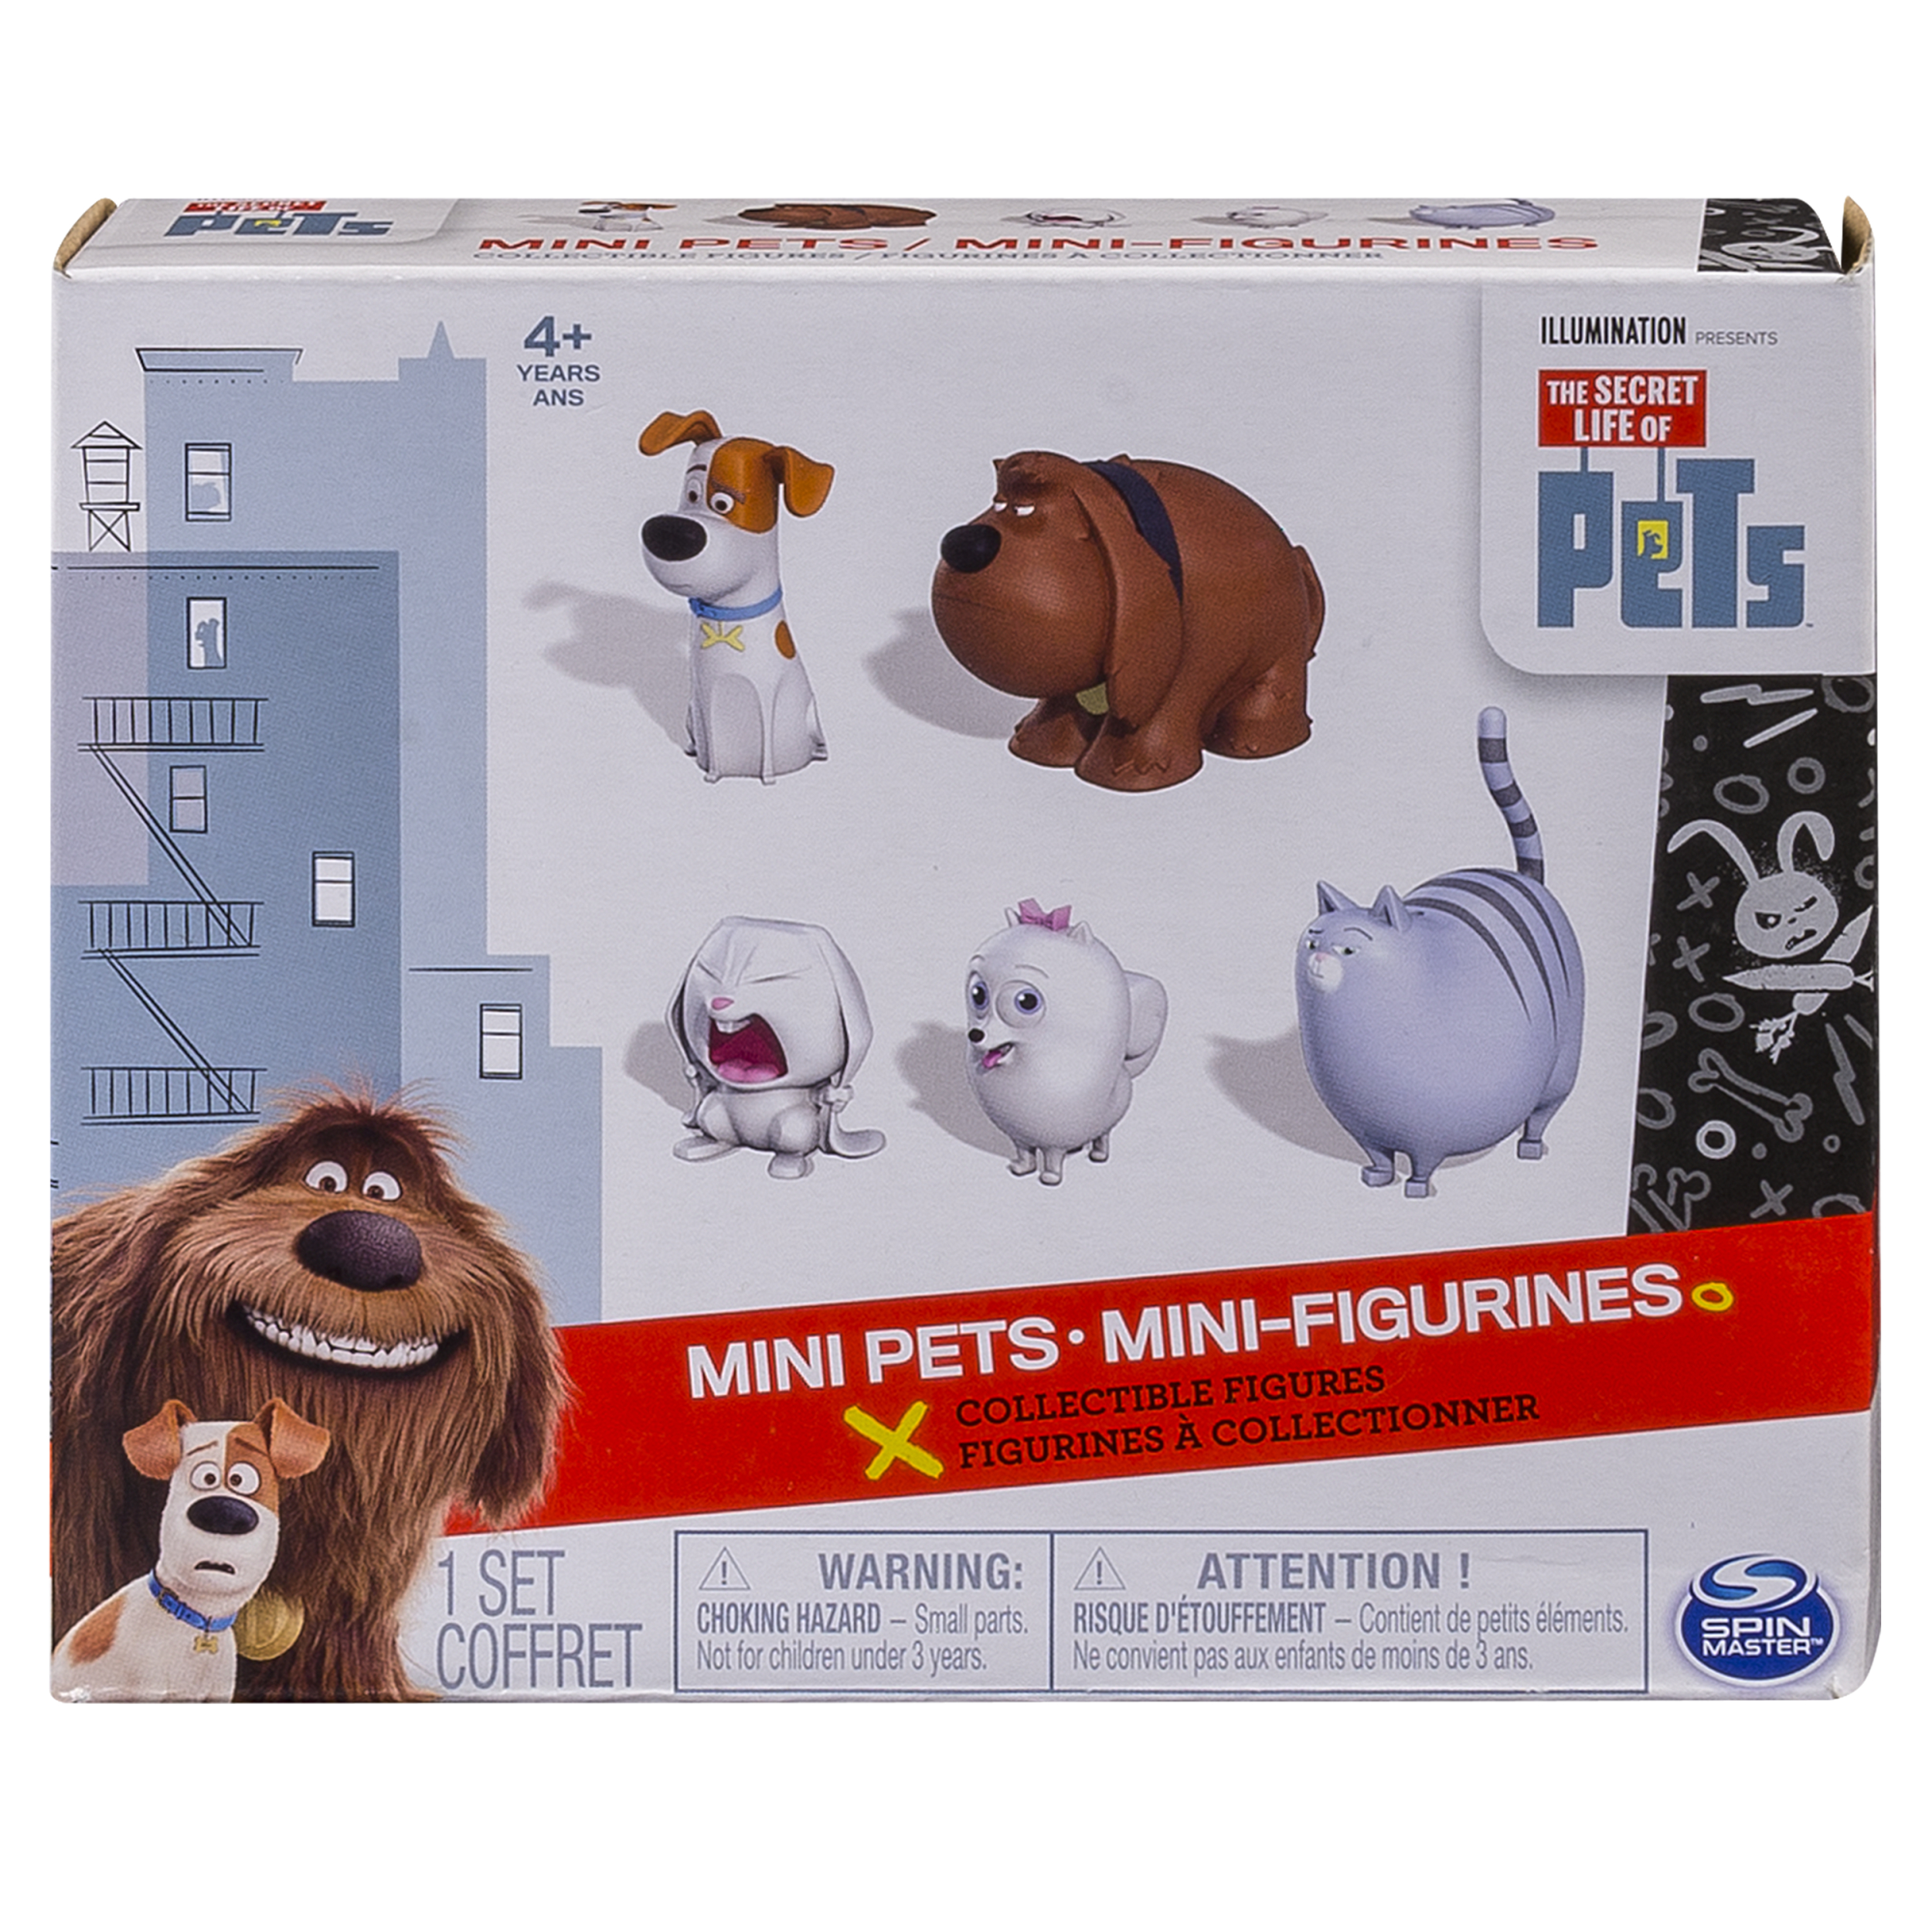 The Secret Life of Pets - Mini Pets Collectible Figures 5-Pack - image 2 of 3